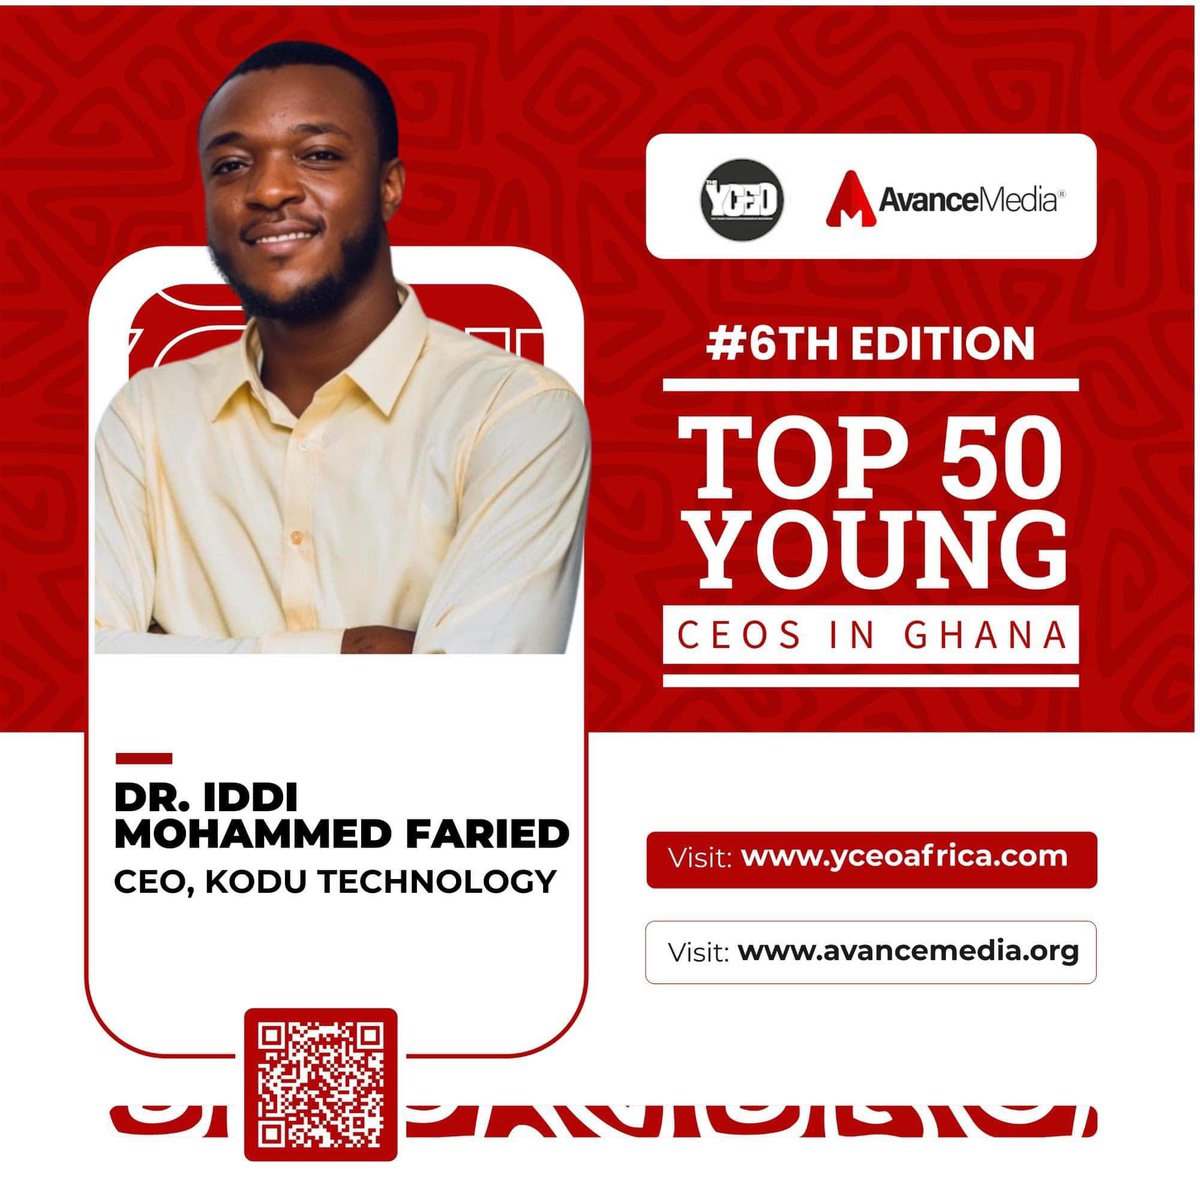 Pleased to be named amongst @avancemedia top 50 young CEOs in Ghana 👏🏻👏🏻